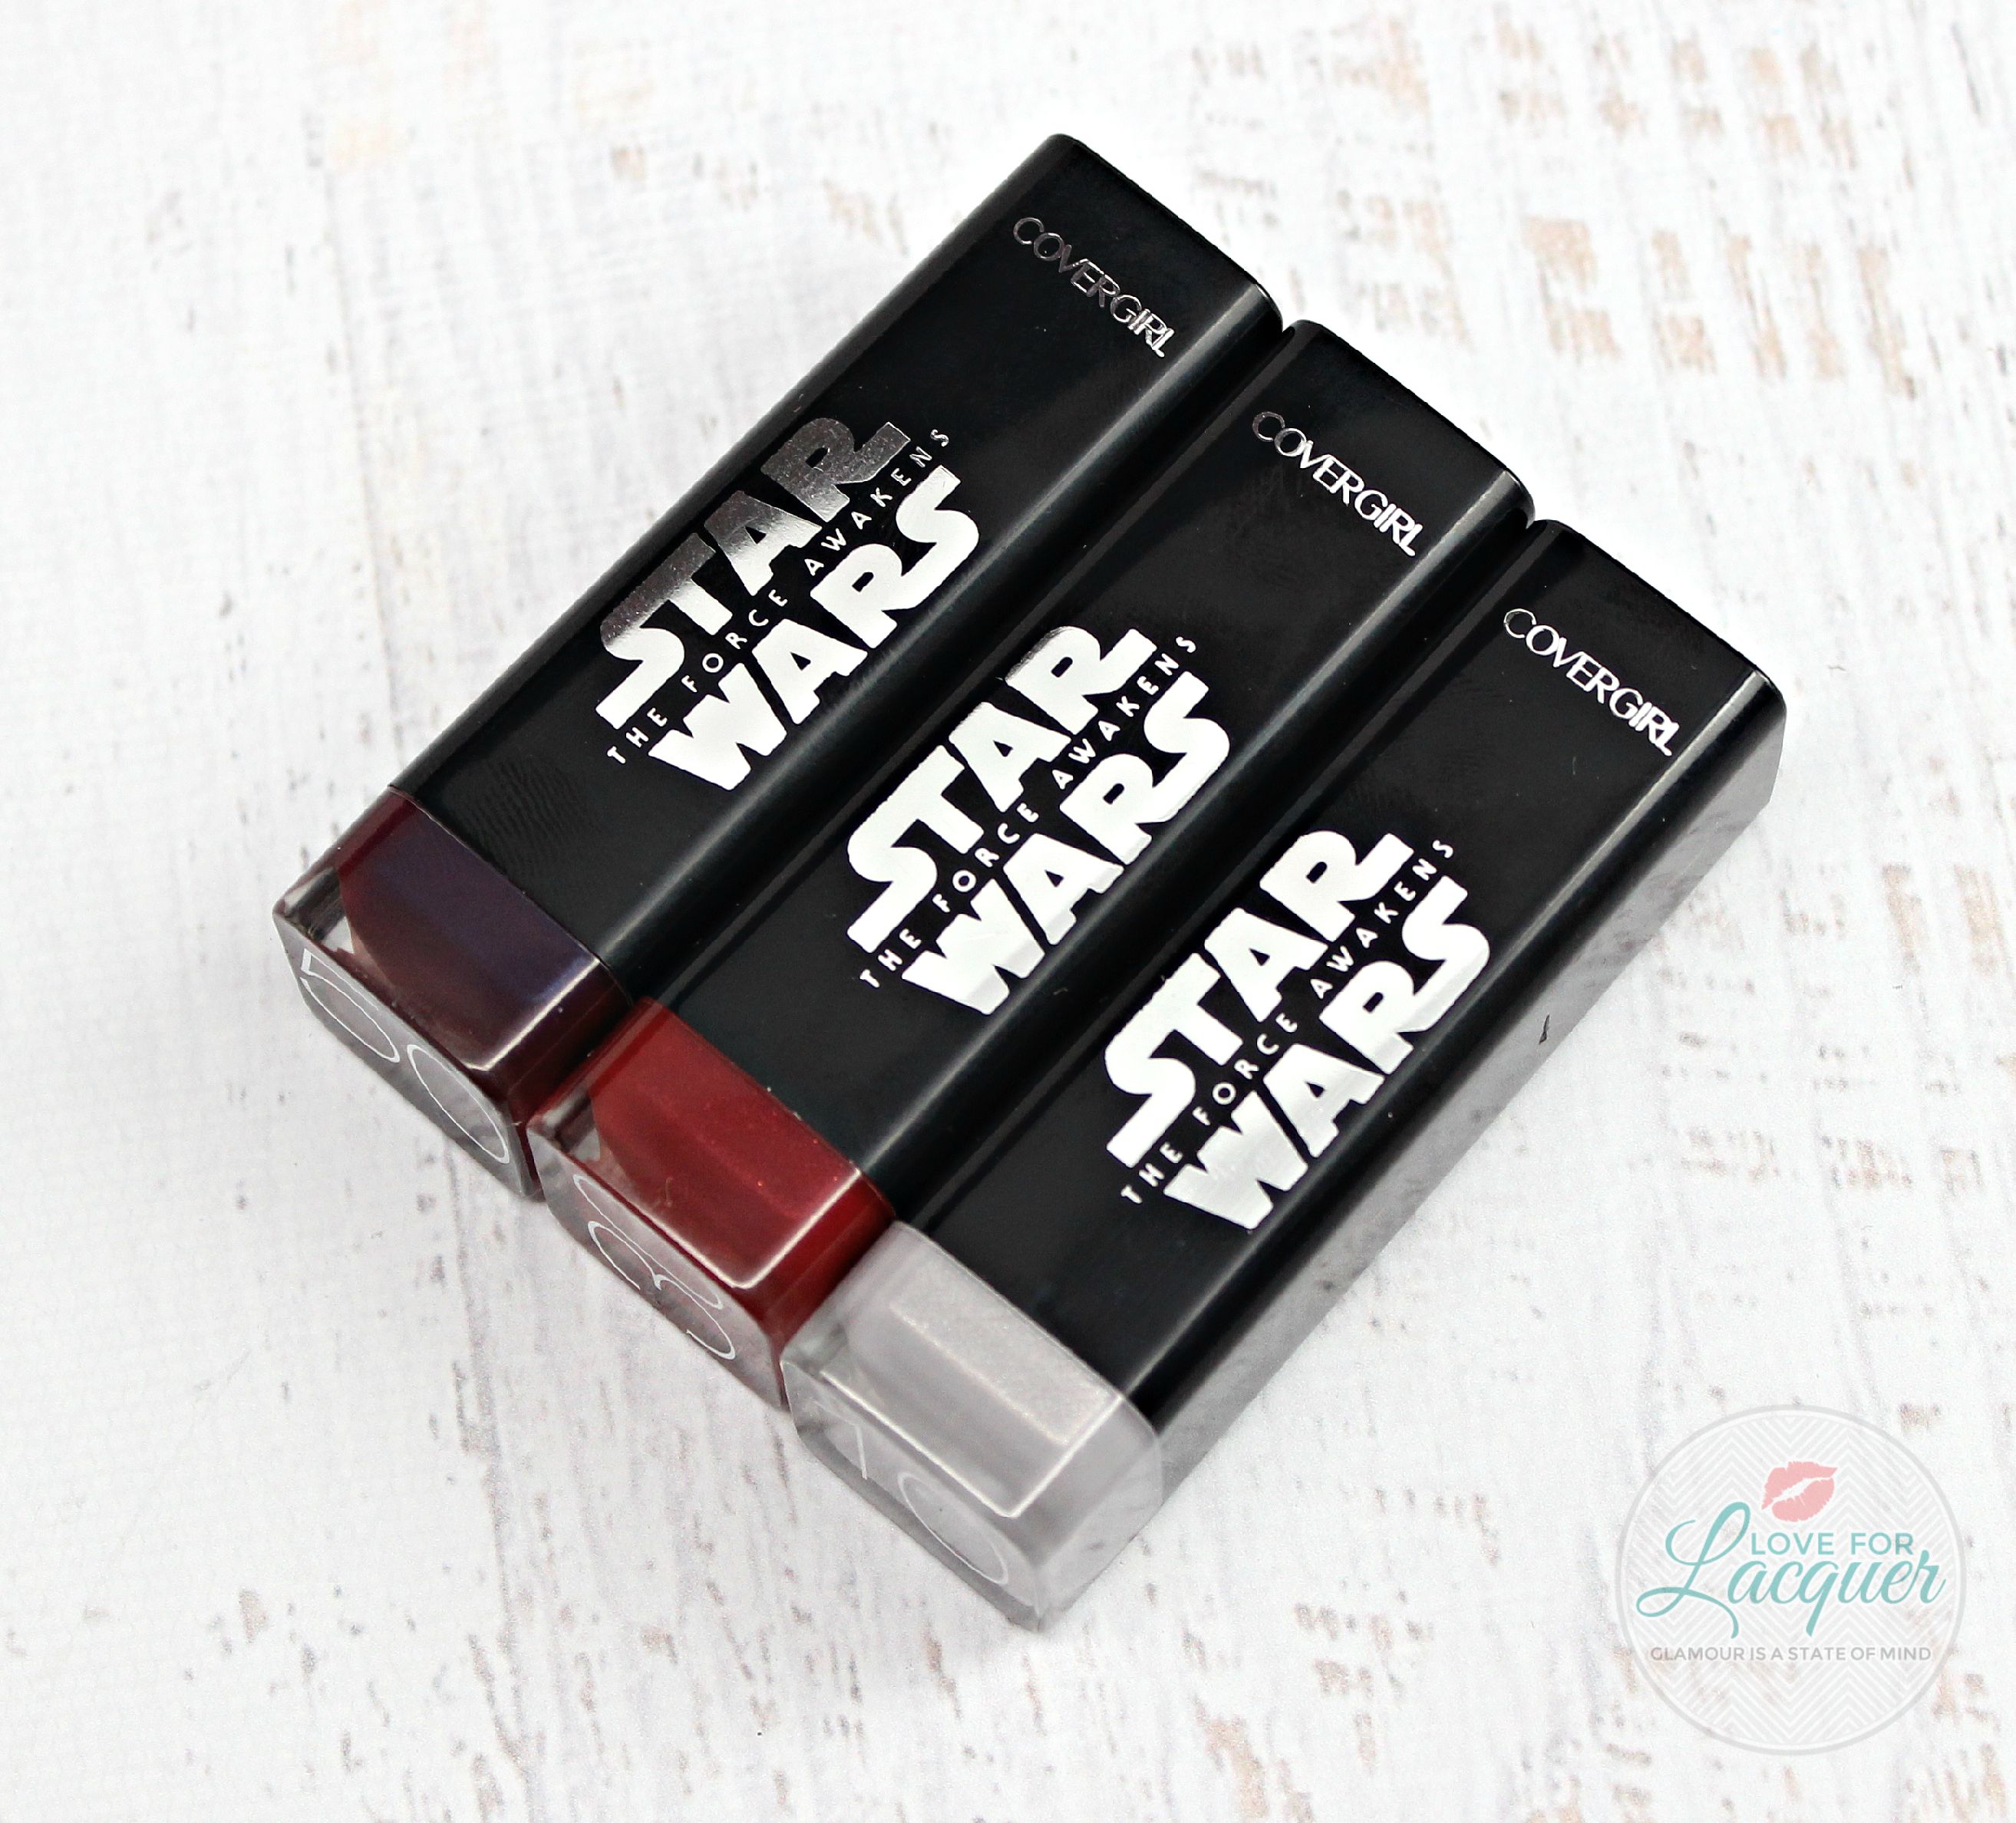 Covergirl x Star Wars Collection